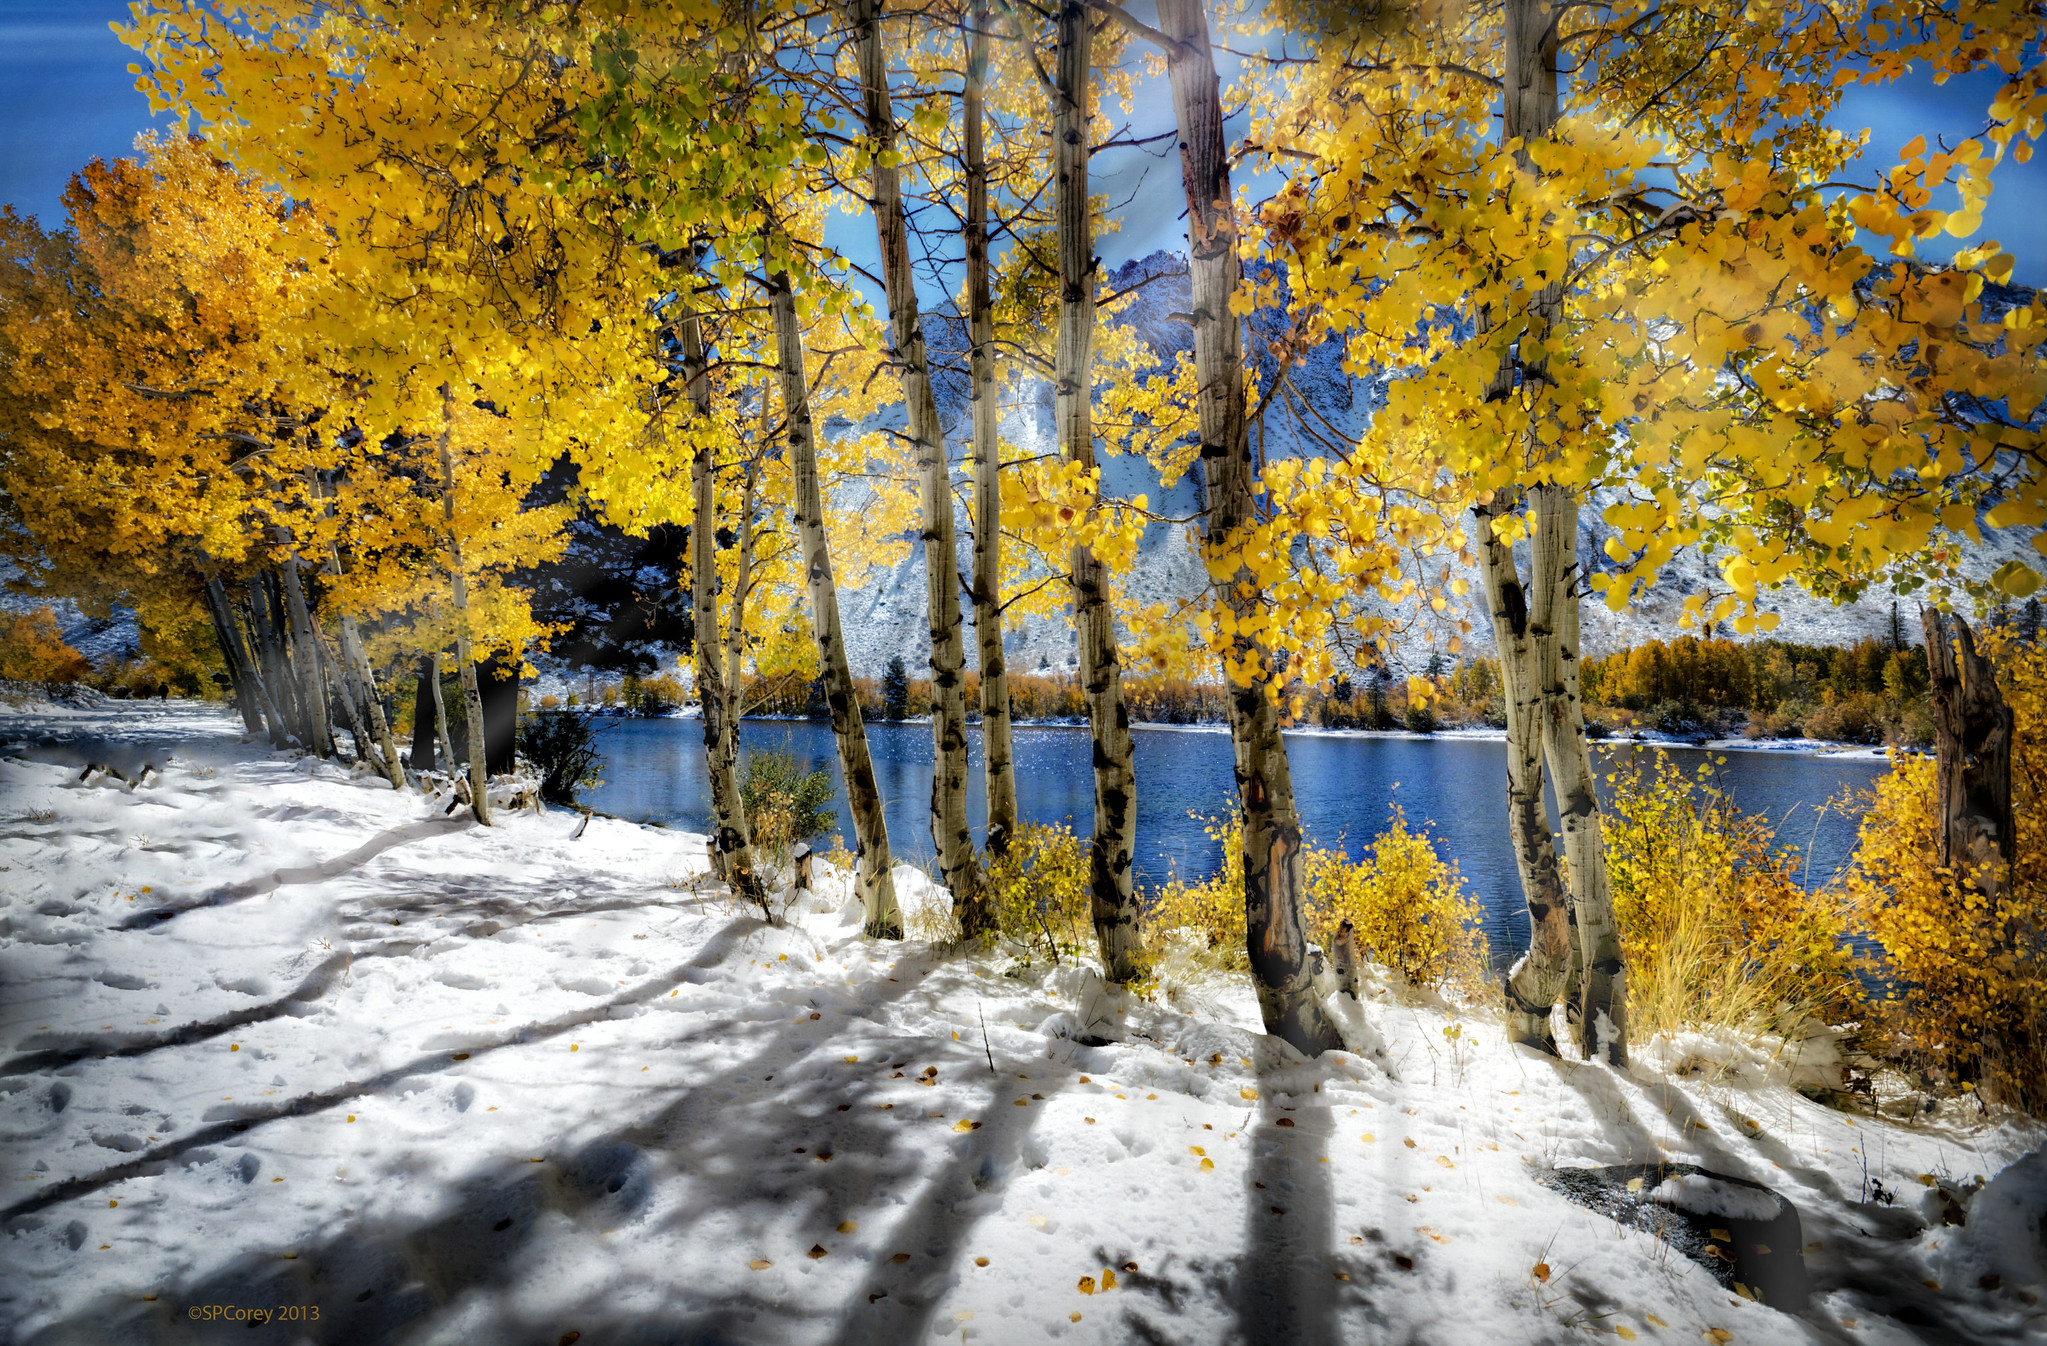 Birch trees with fall leaves in the snow.